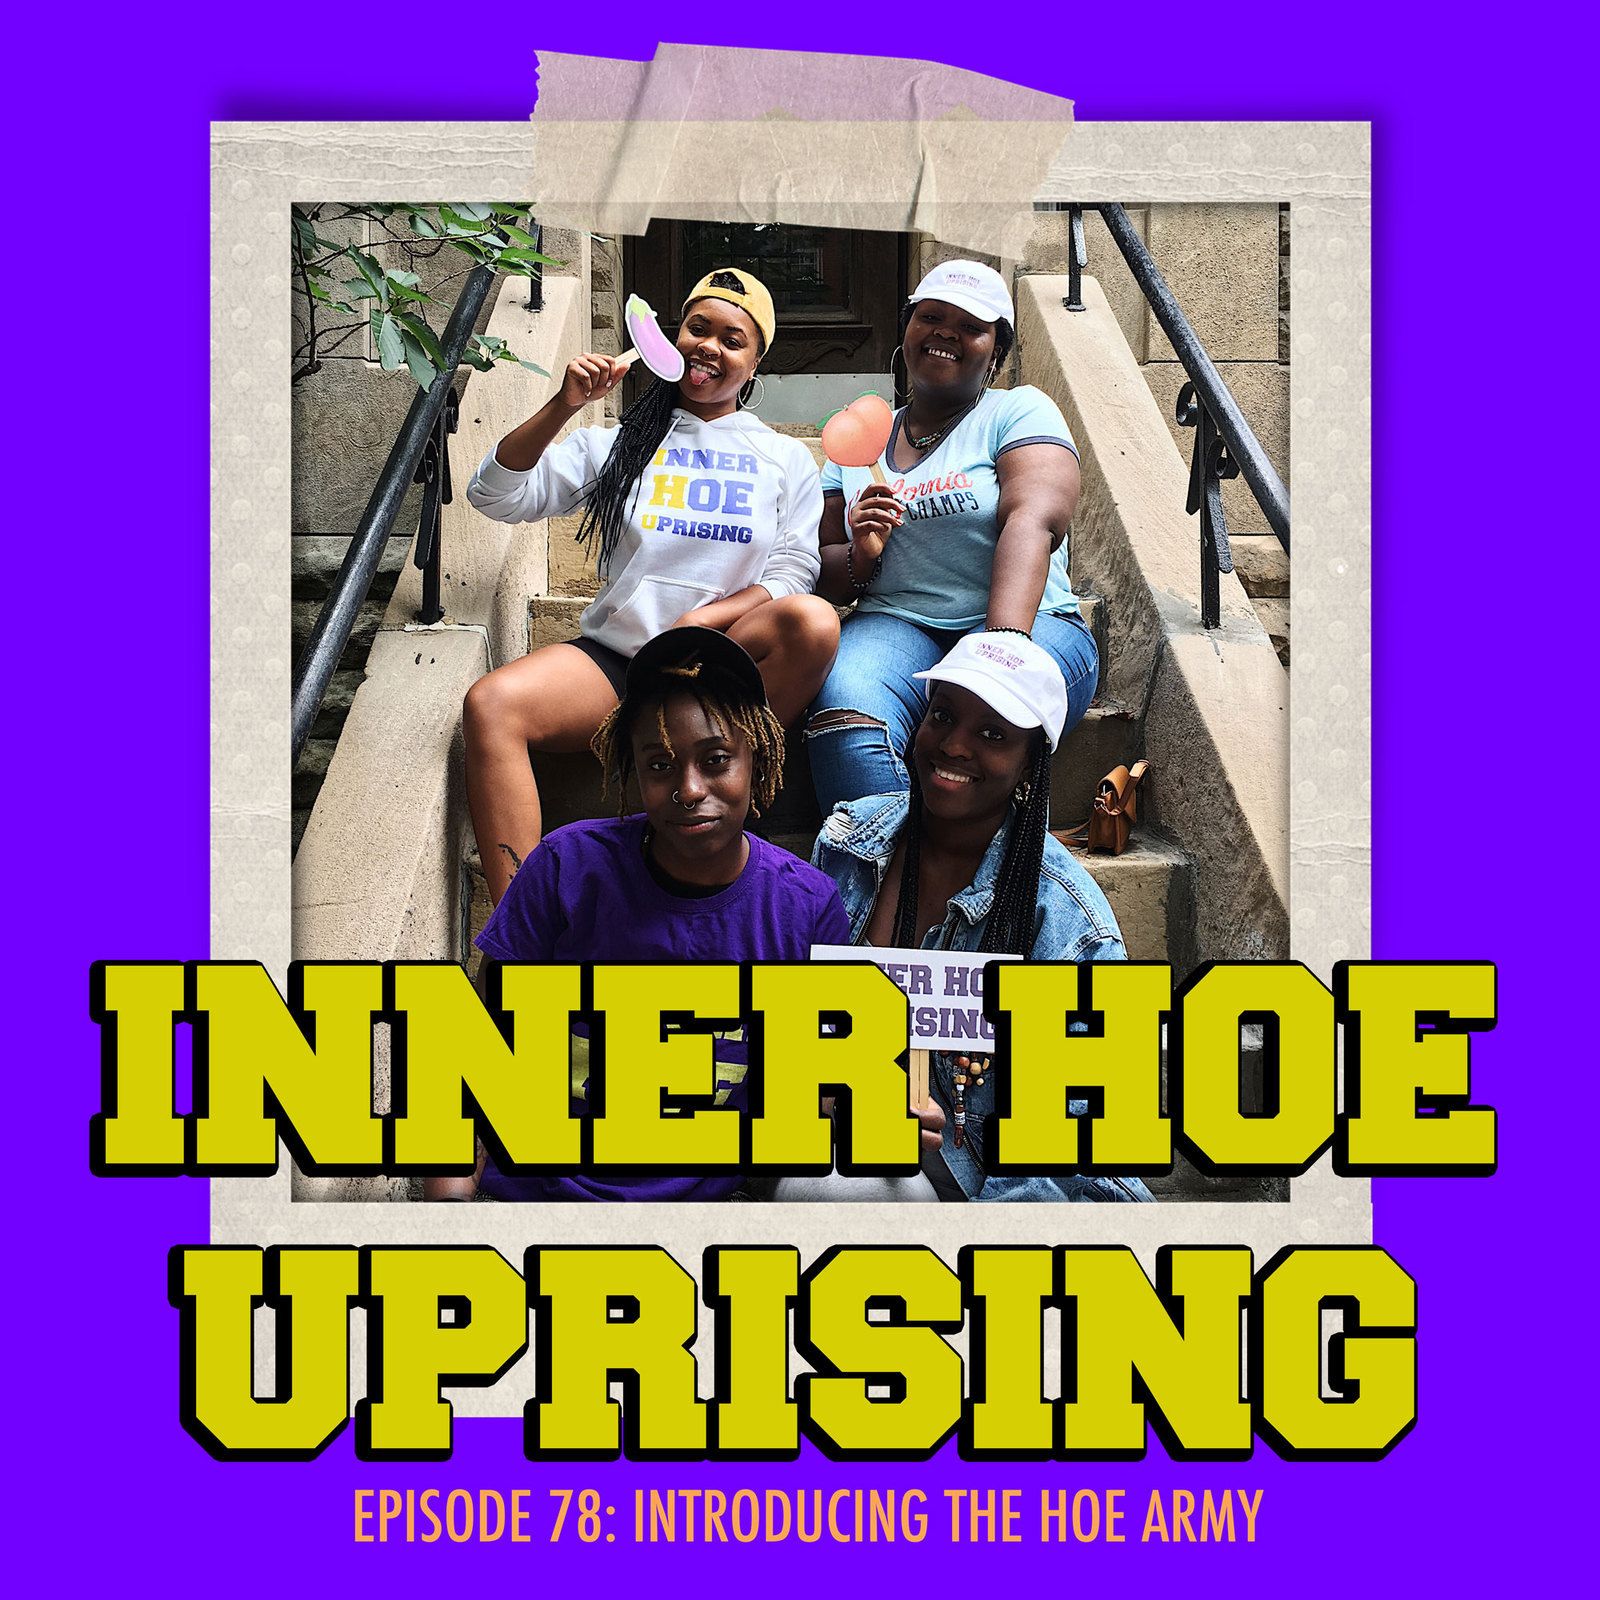 Thumbnail for "S3 Ep1: Introducing the Hoe Army".